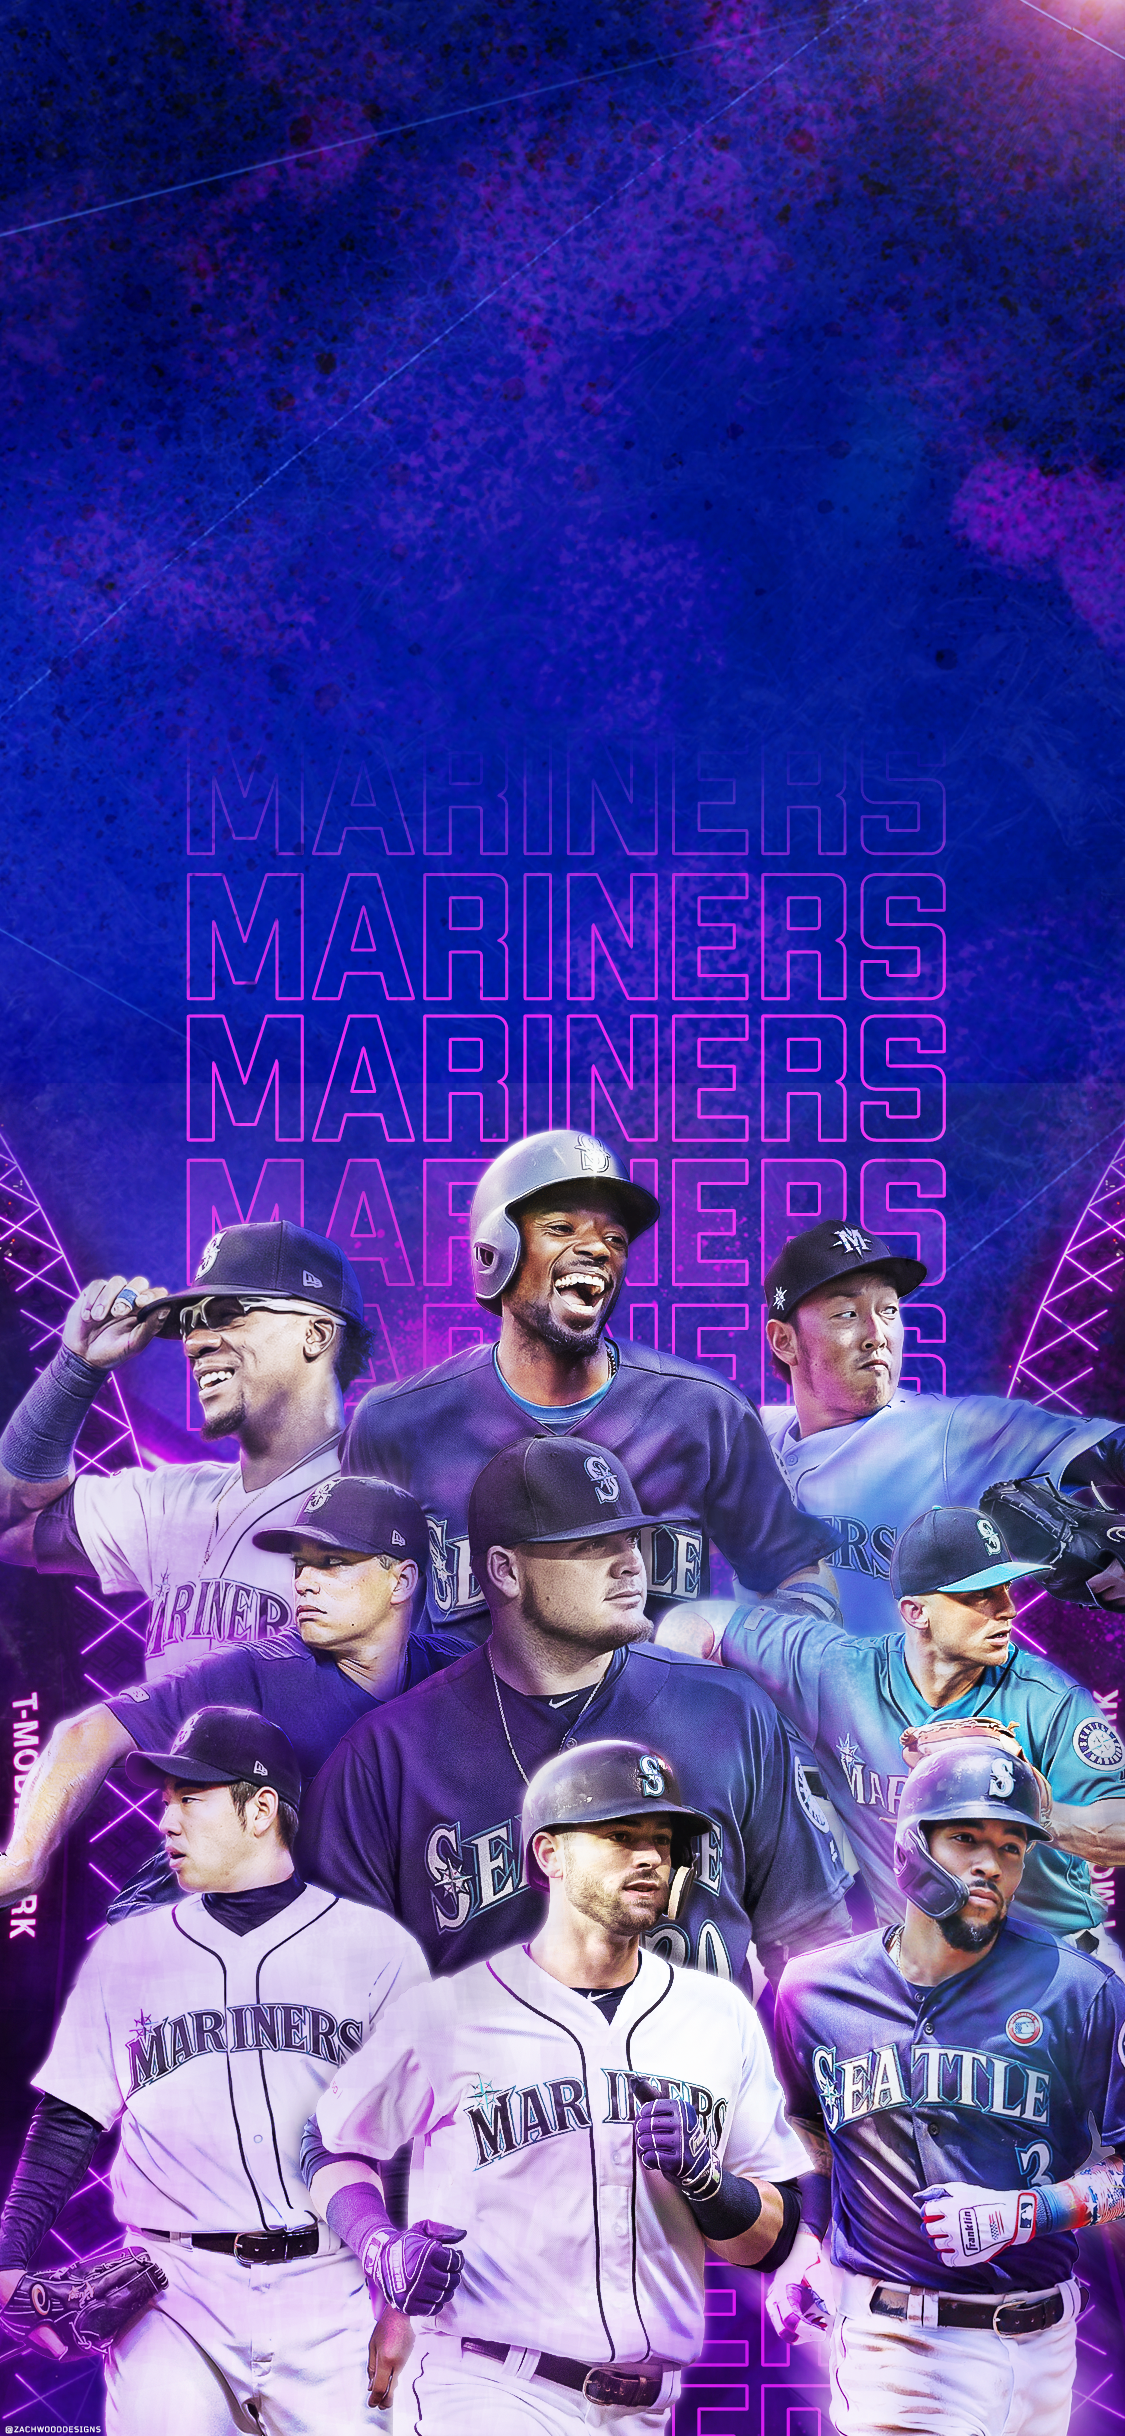 30 Of My MLB Team Design Challenge, The Seattle Mariners